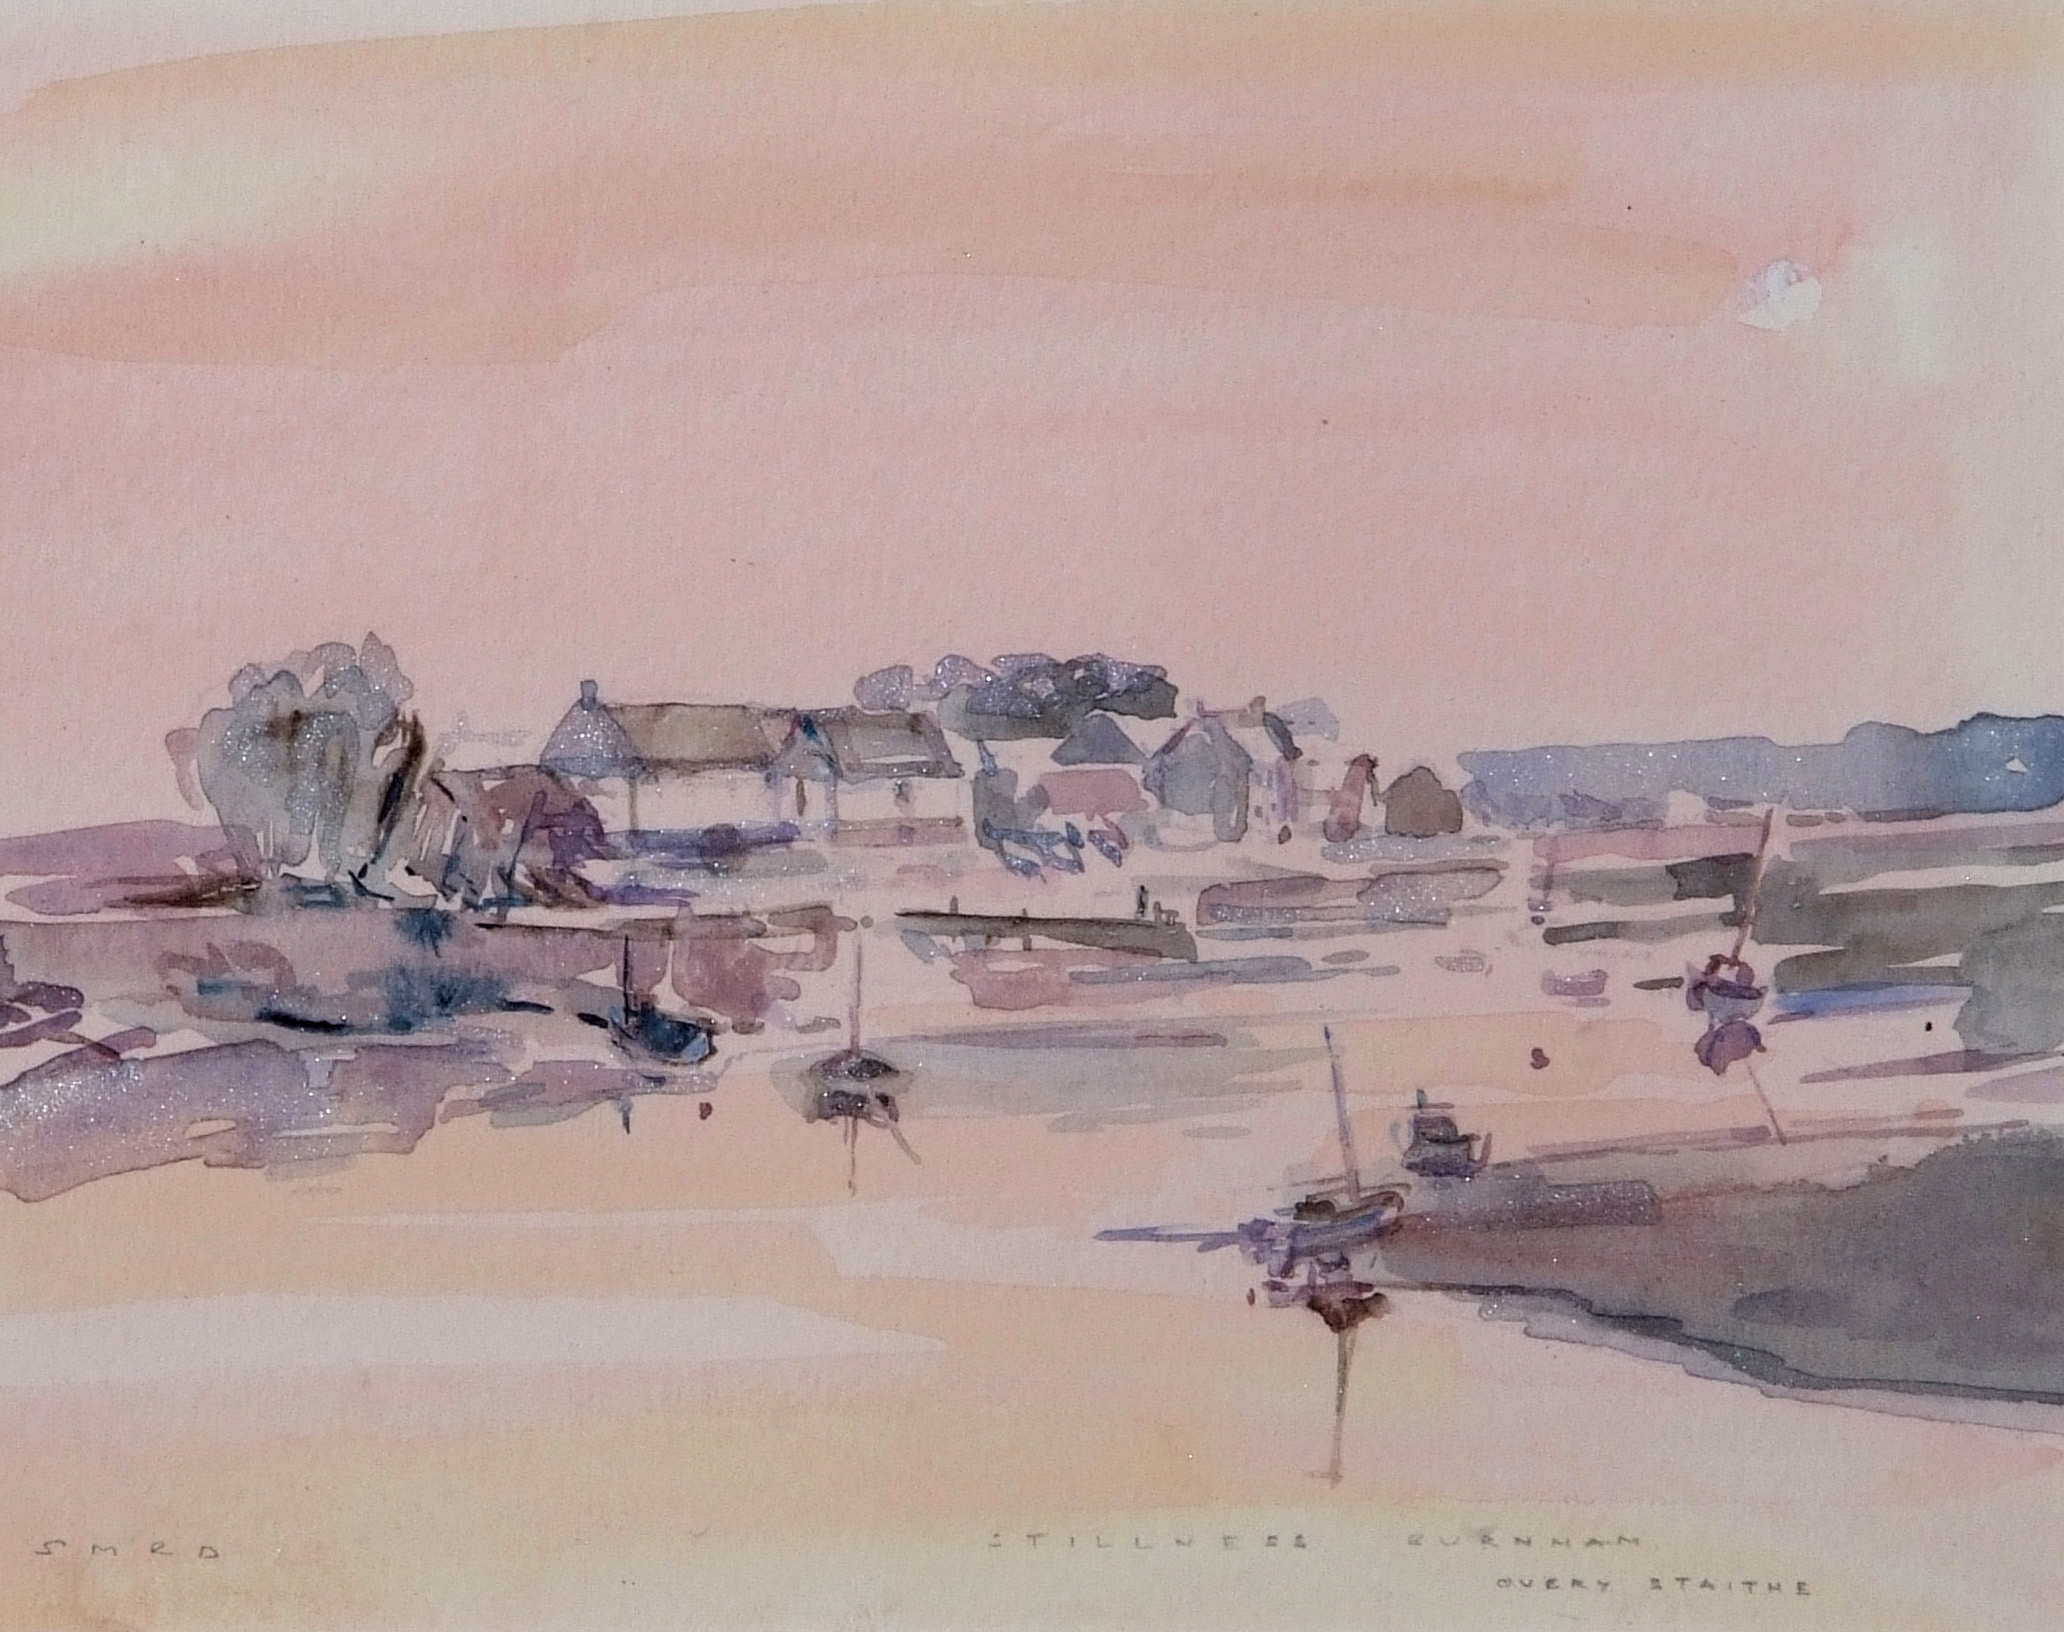 Sarah Dyson (contemporary), "Stillness, Burnham Overy Staithe", watercolour, signed lower left and